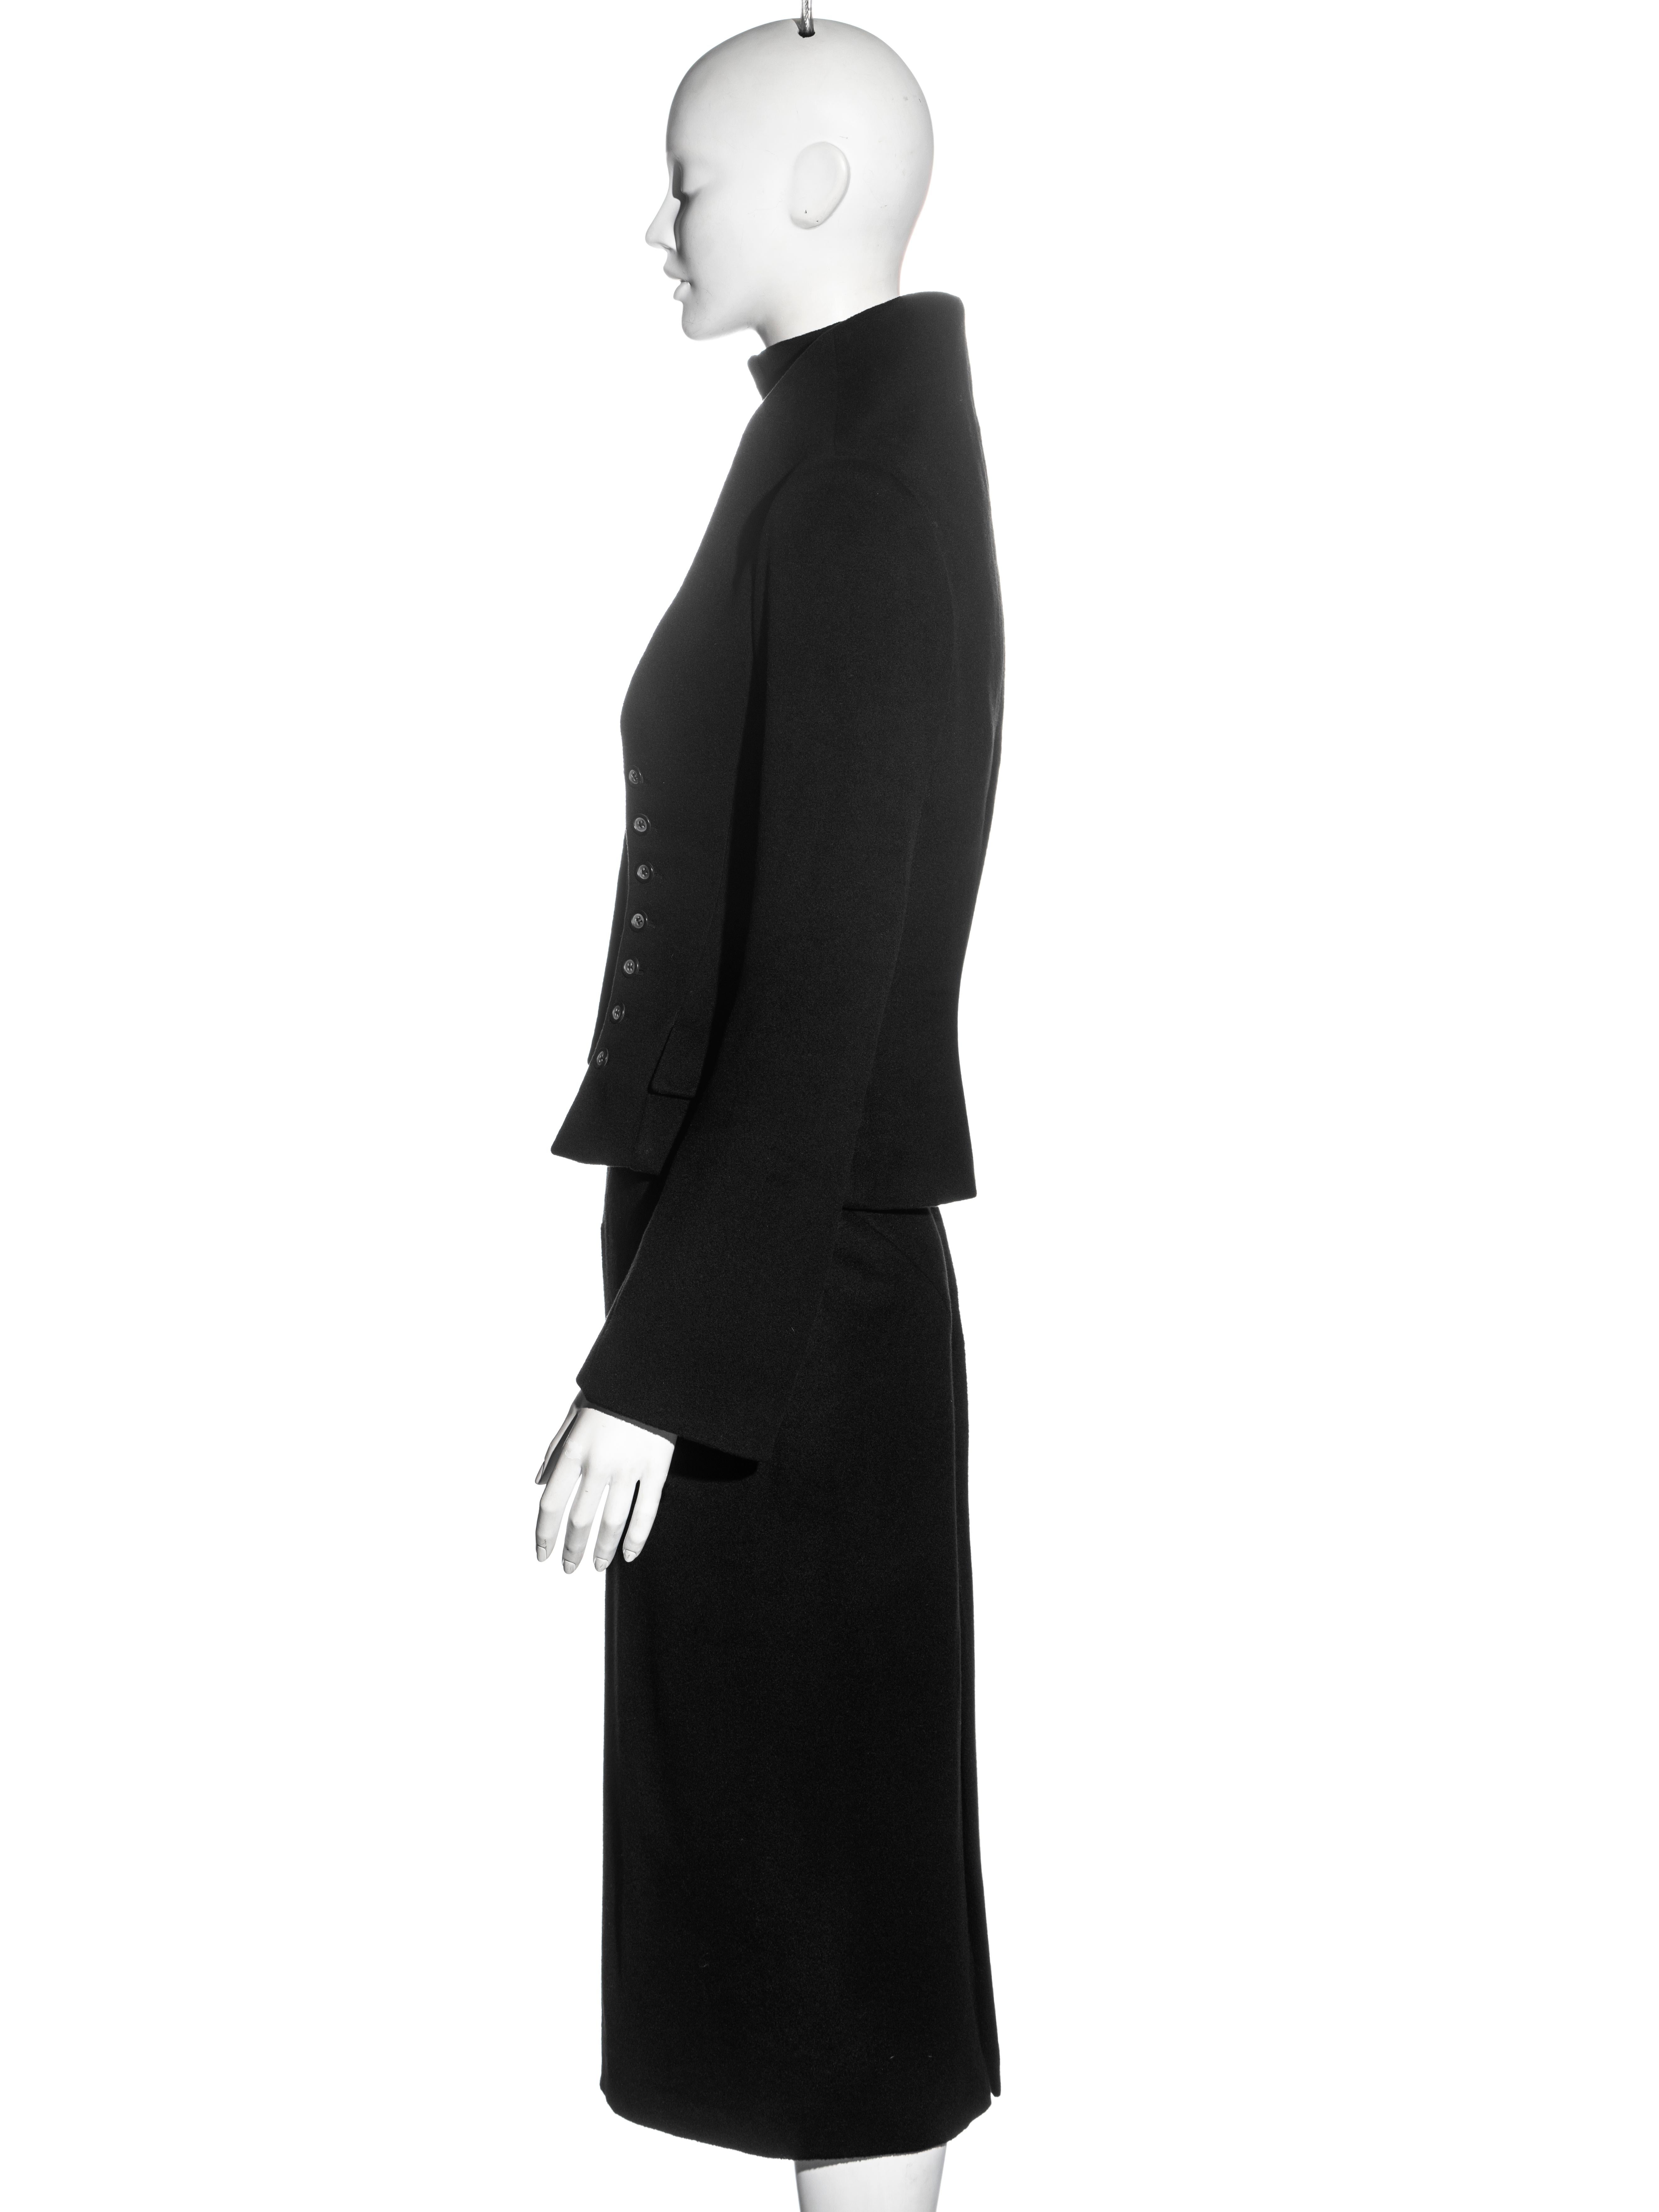 Alexander McQueen black cashmere 'Joan' jacket and skirt suit, fw 1998 For Sale 7